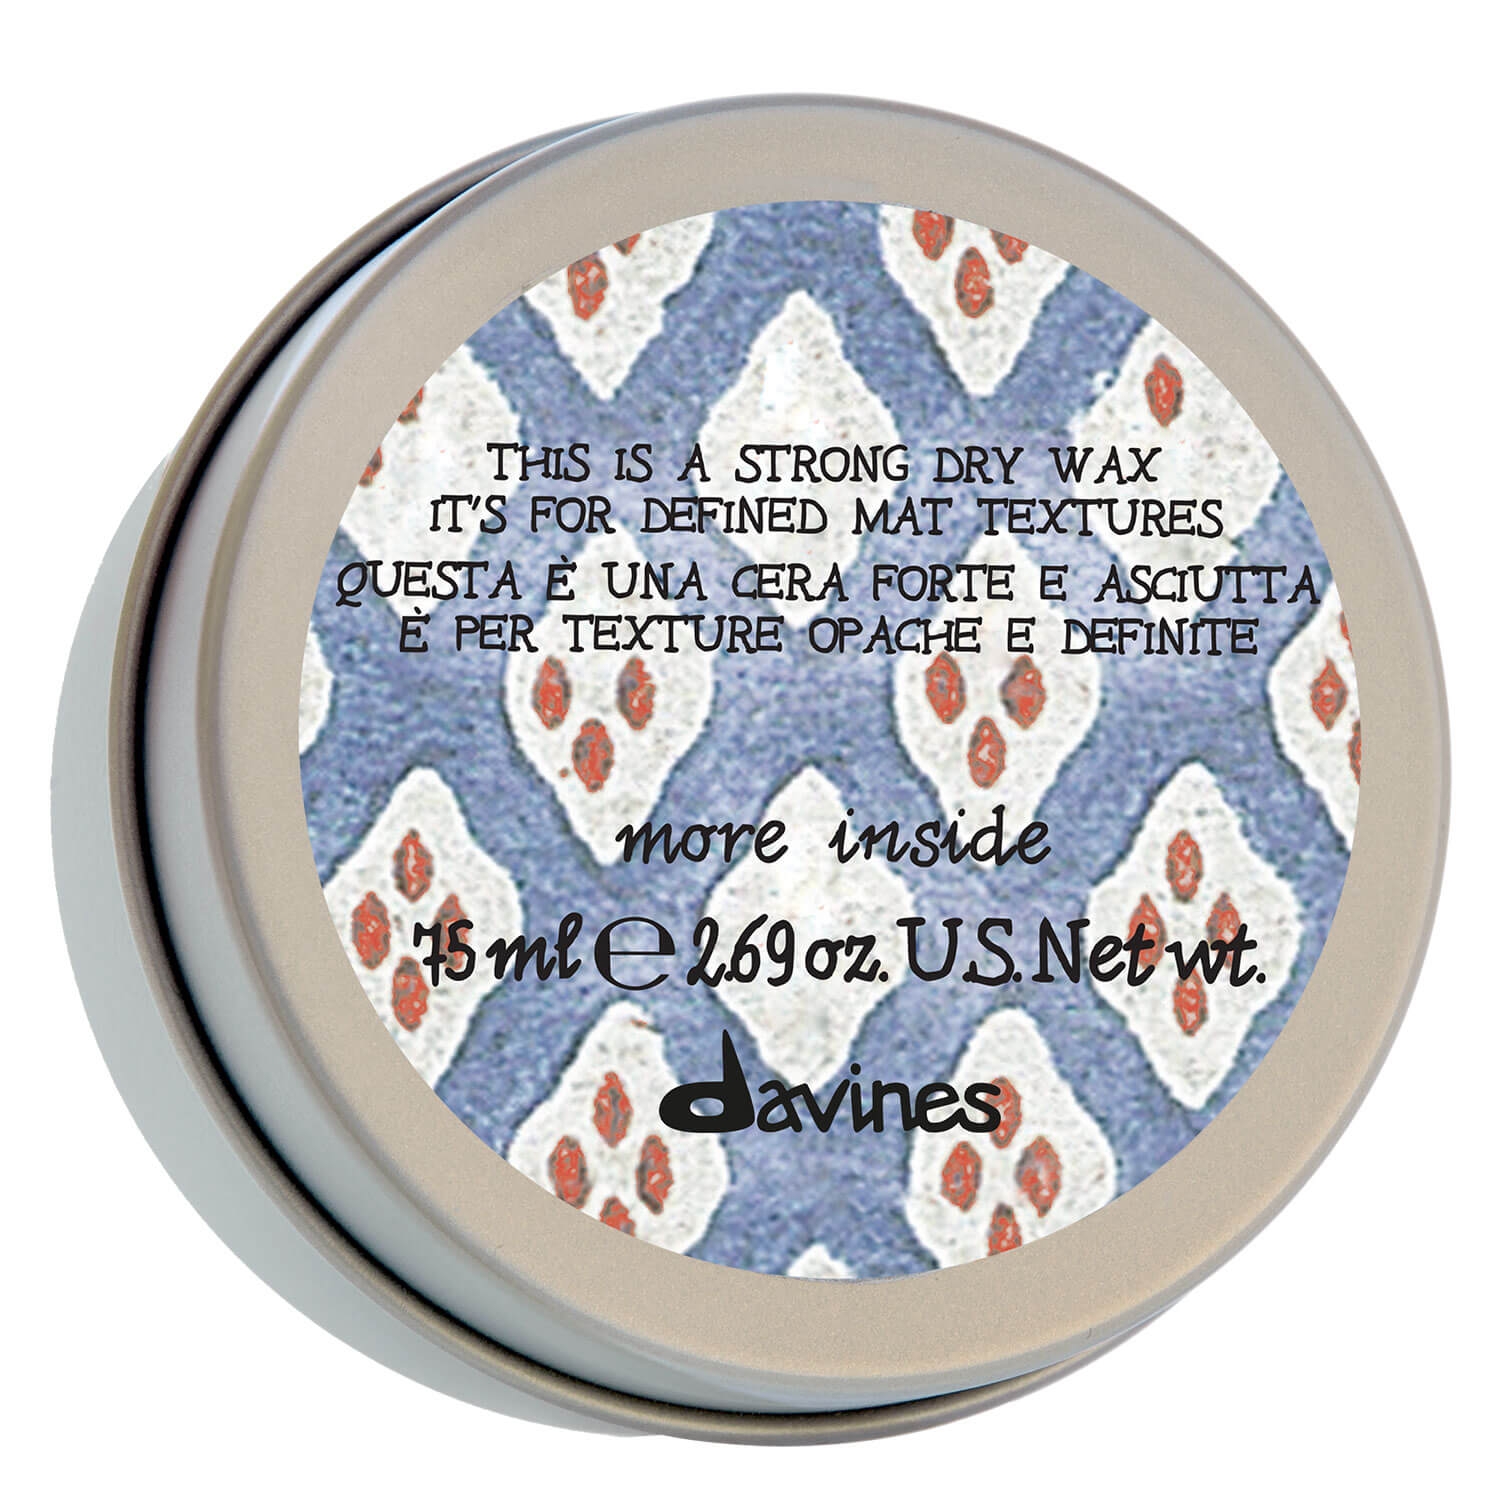 Product image from More Inside - This is a Strong Dry Wax